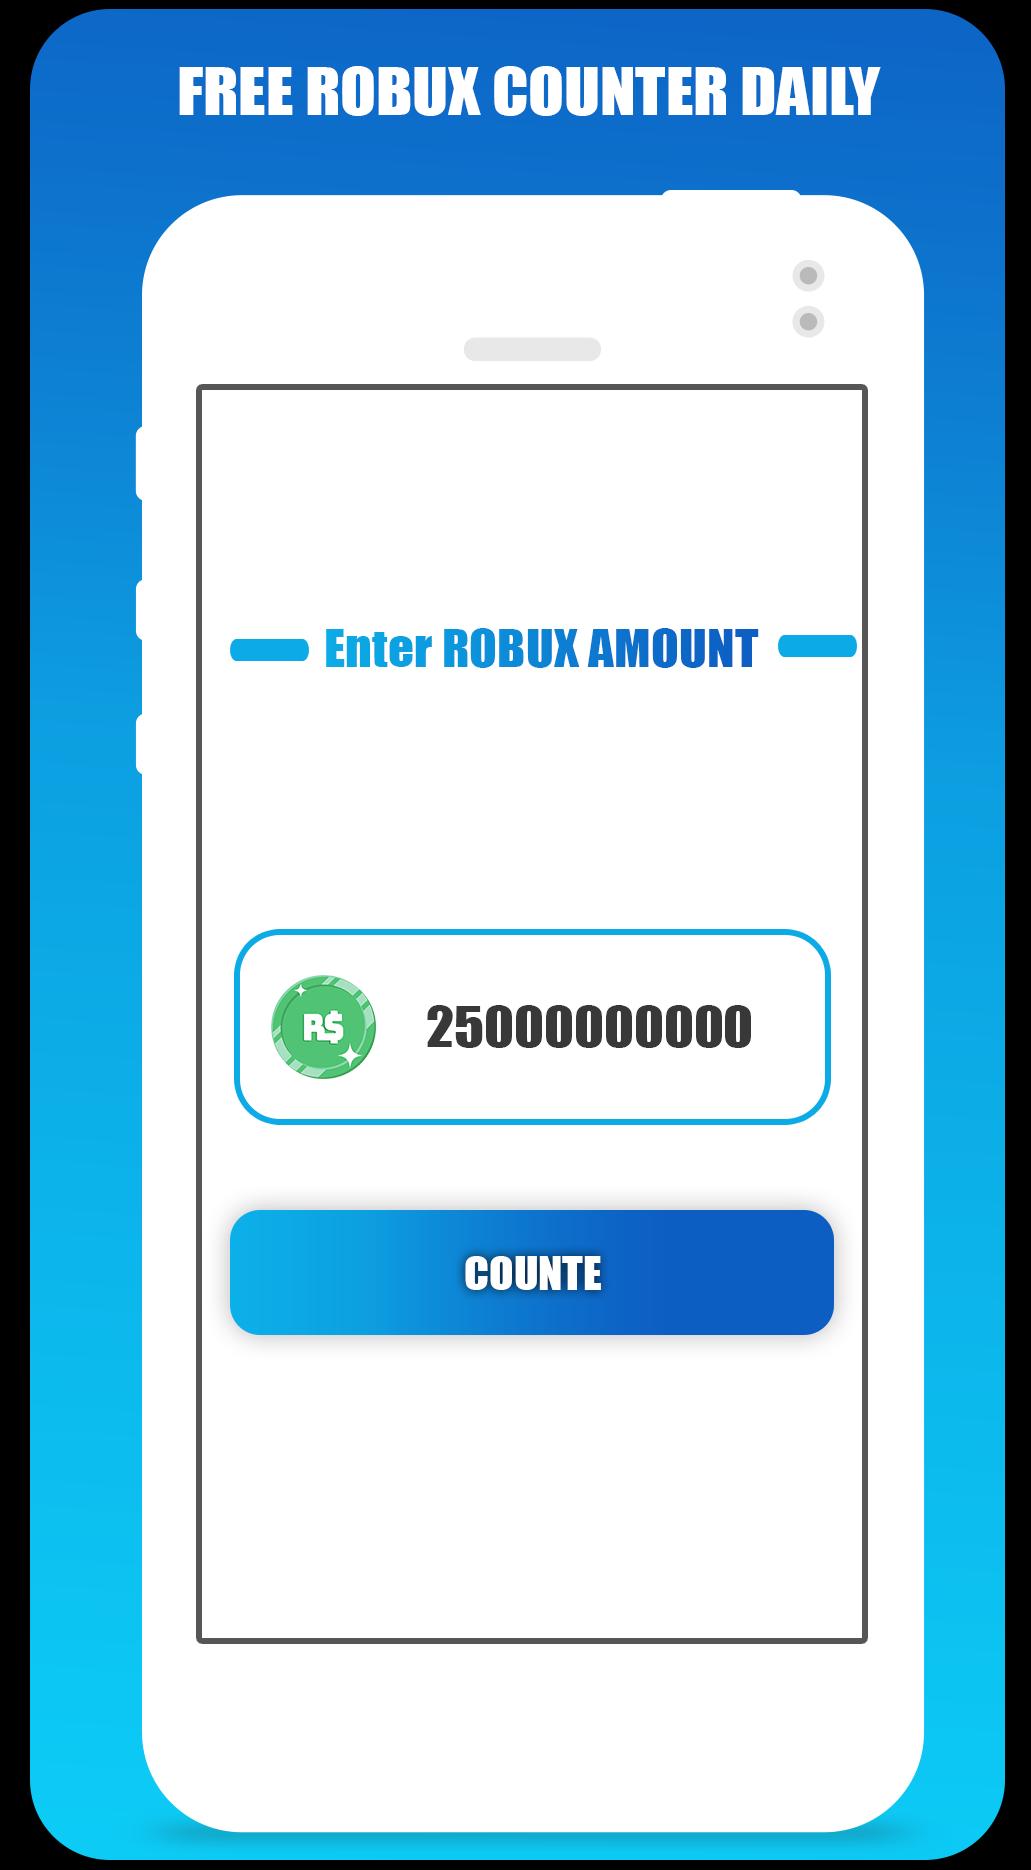 Free Robux Counter For Android Apk Download - get free robux counter for roblox apk download apkpure com